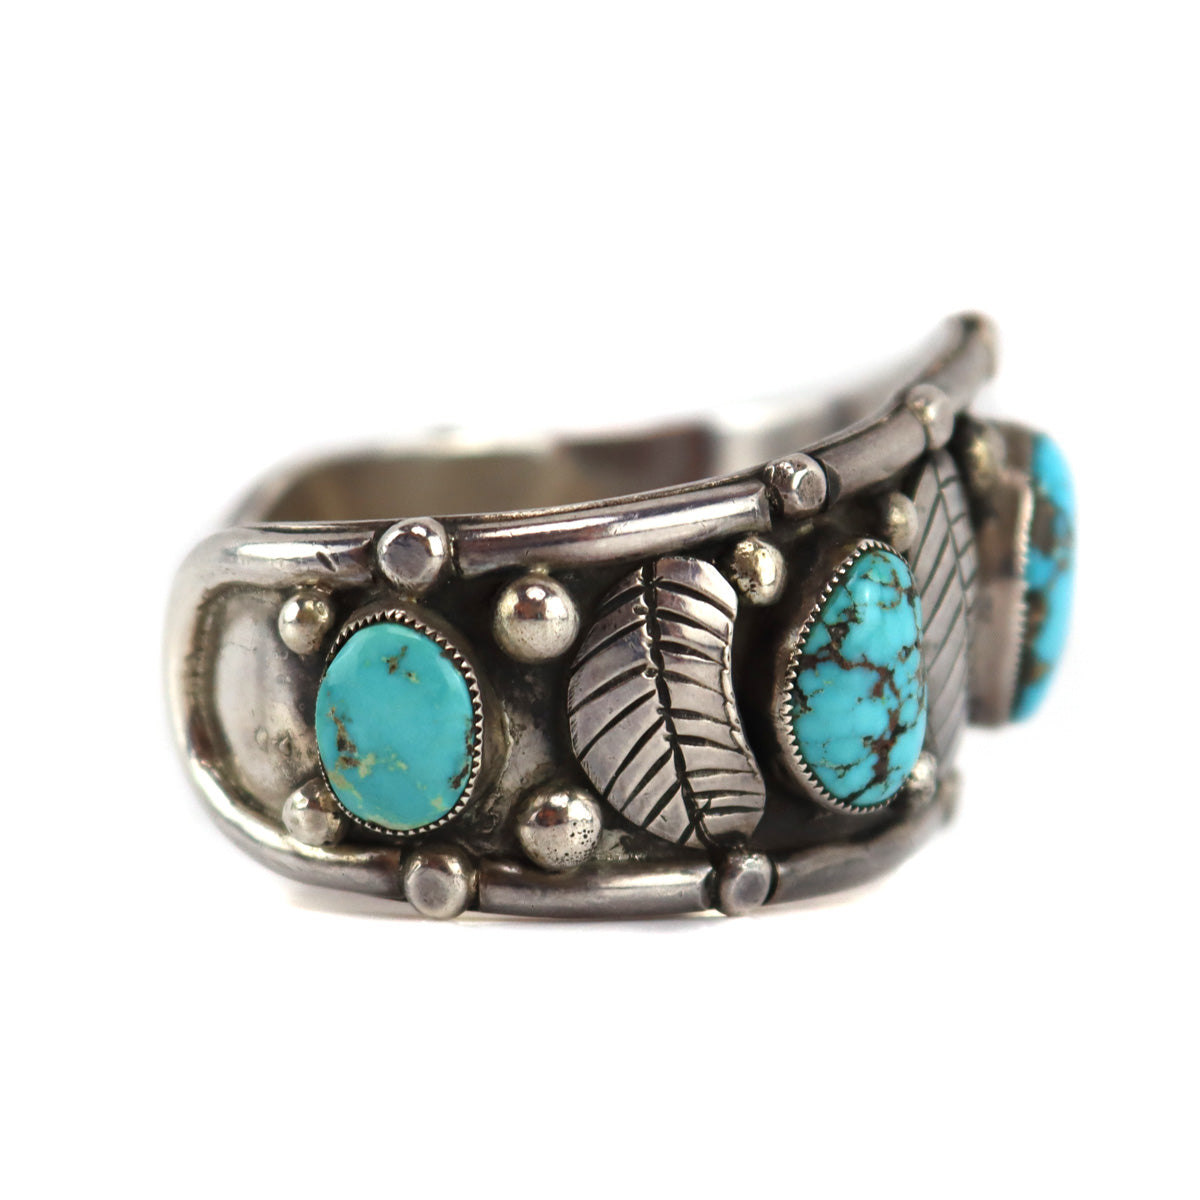 Navajo - Natural Turquoise Stones and Silver Bracelet with Feather Design c. 1960s, size 6 (J16023)